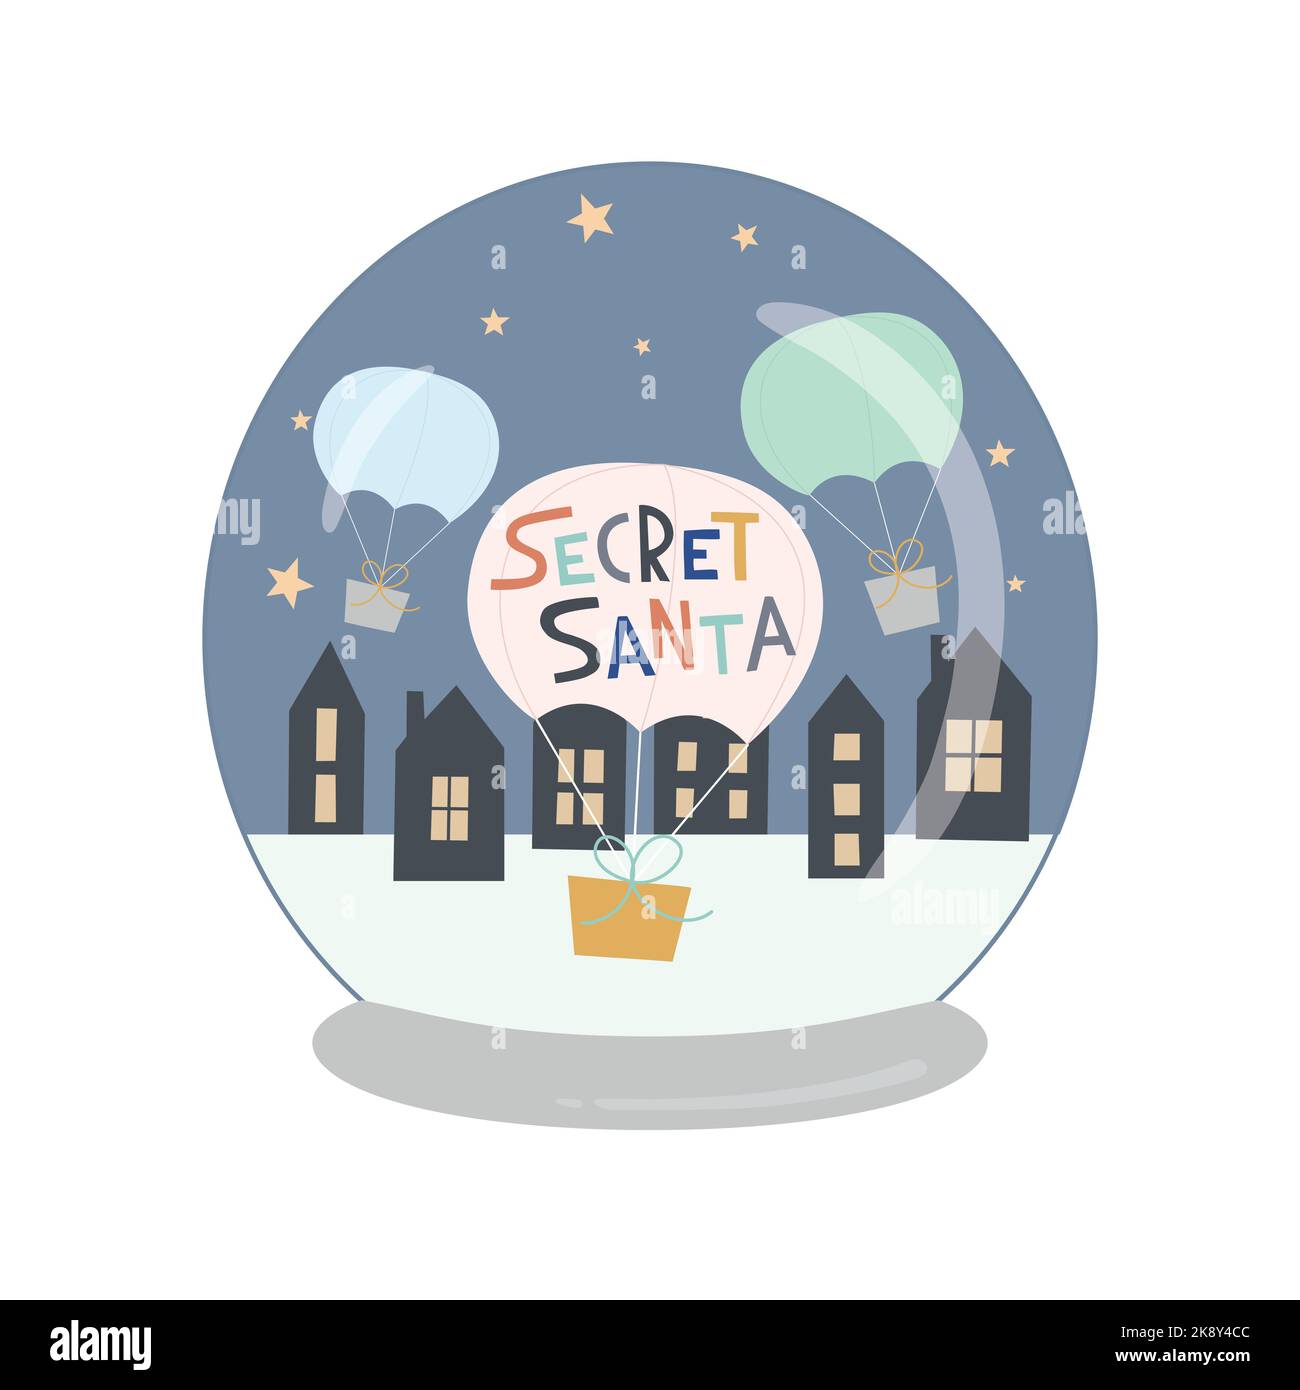 Lettering Secret Santa, Snow ball, delivery of gift by parachute. Concept vector illustration. Stock Vector